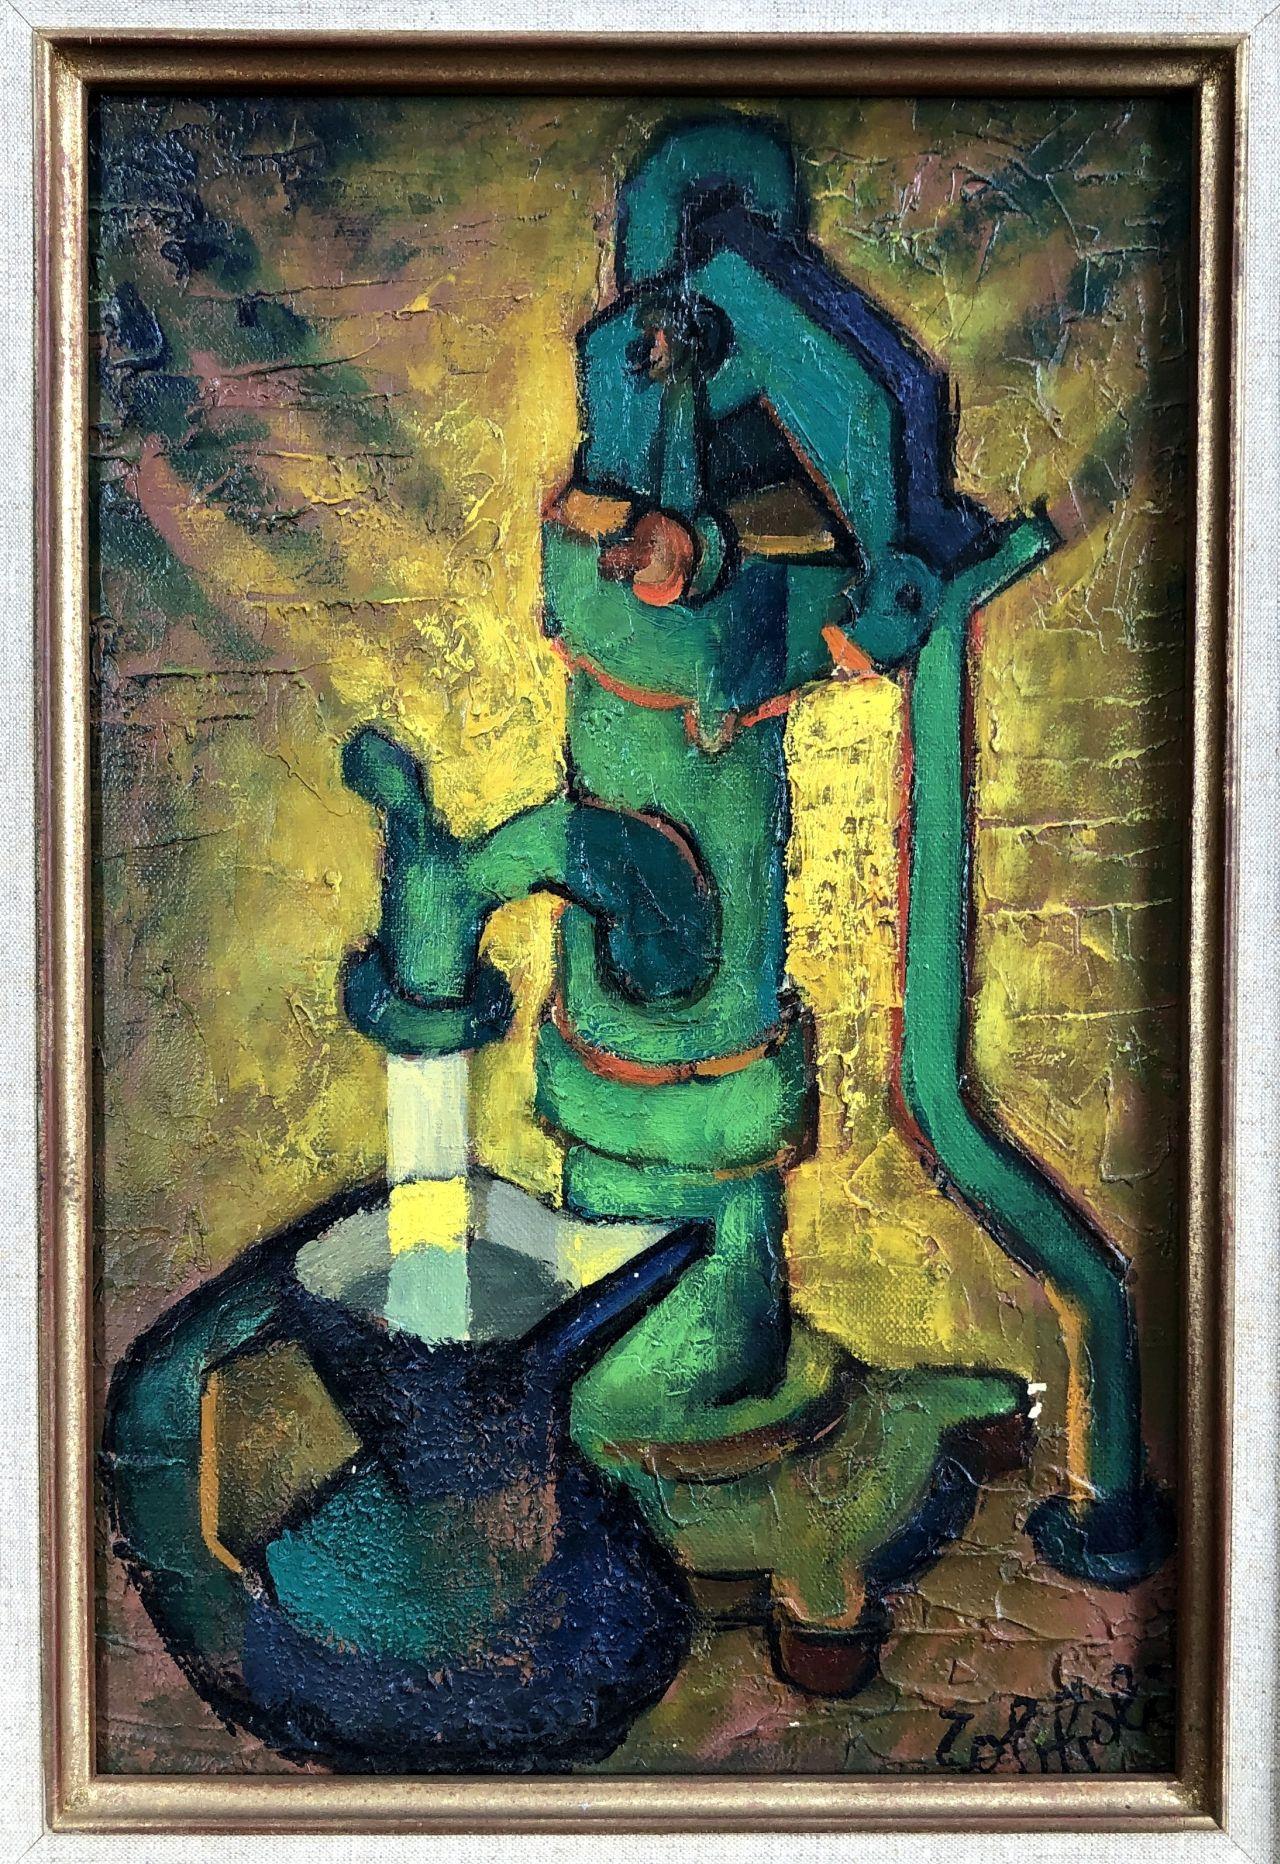 The Small Fountain - Oil on Canvas Handsigned - Painting by Louis Toffoli